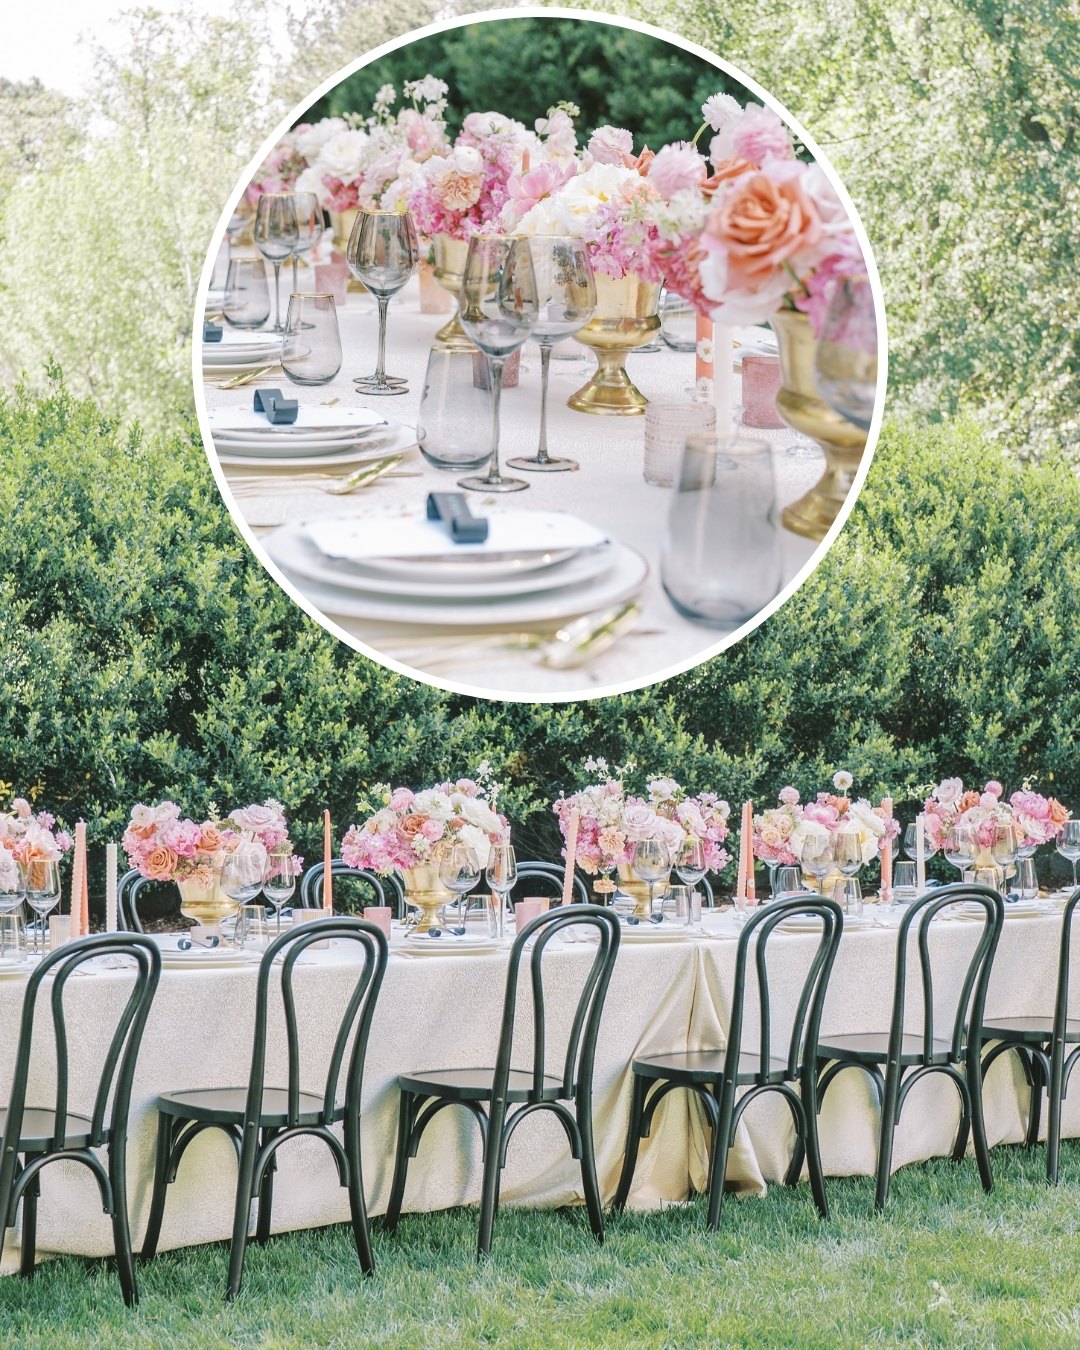 Wedding dinner reception set up in soft pinks and pastels